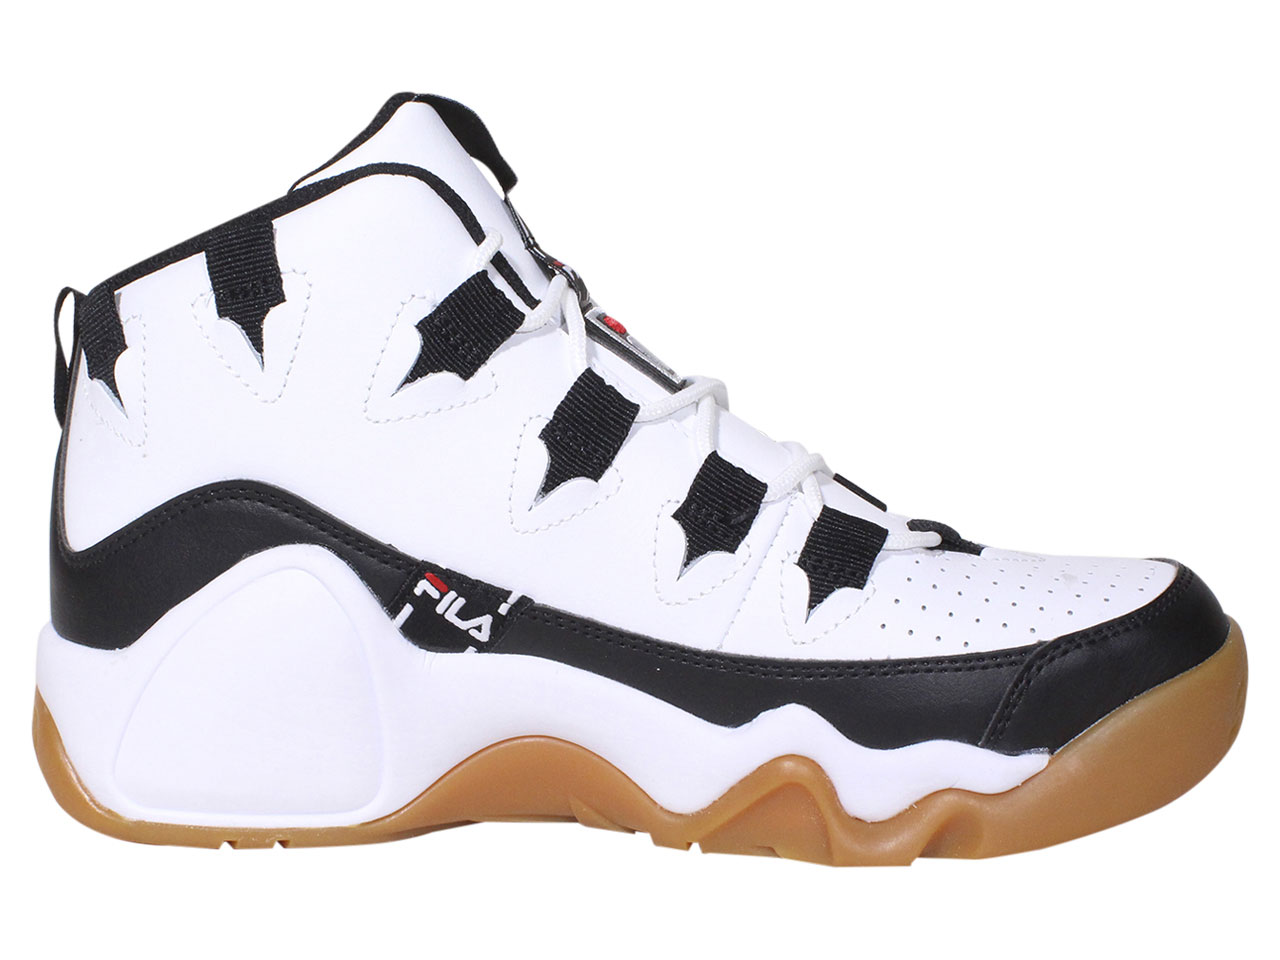 Fila Grant-Hill-1-Tarvos Sneakers White/Black/Red Men's High Top Shoes ...